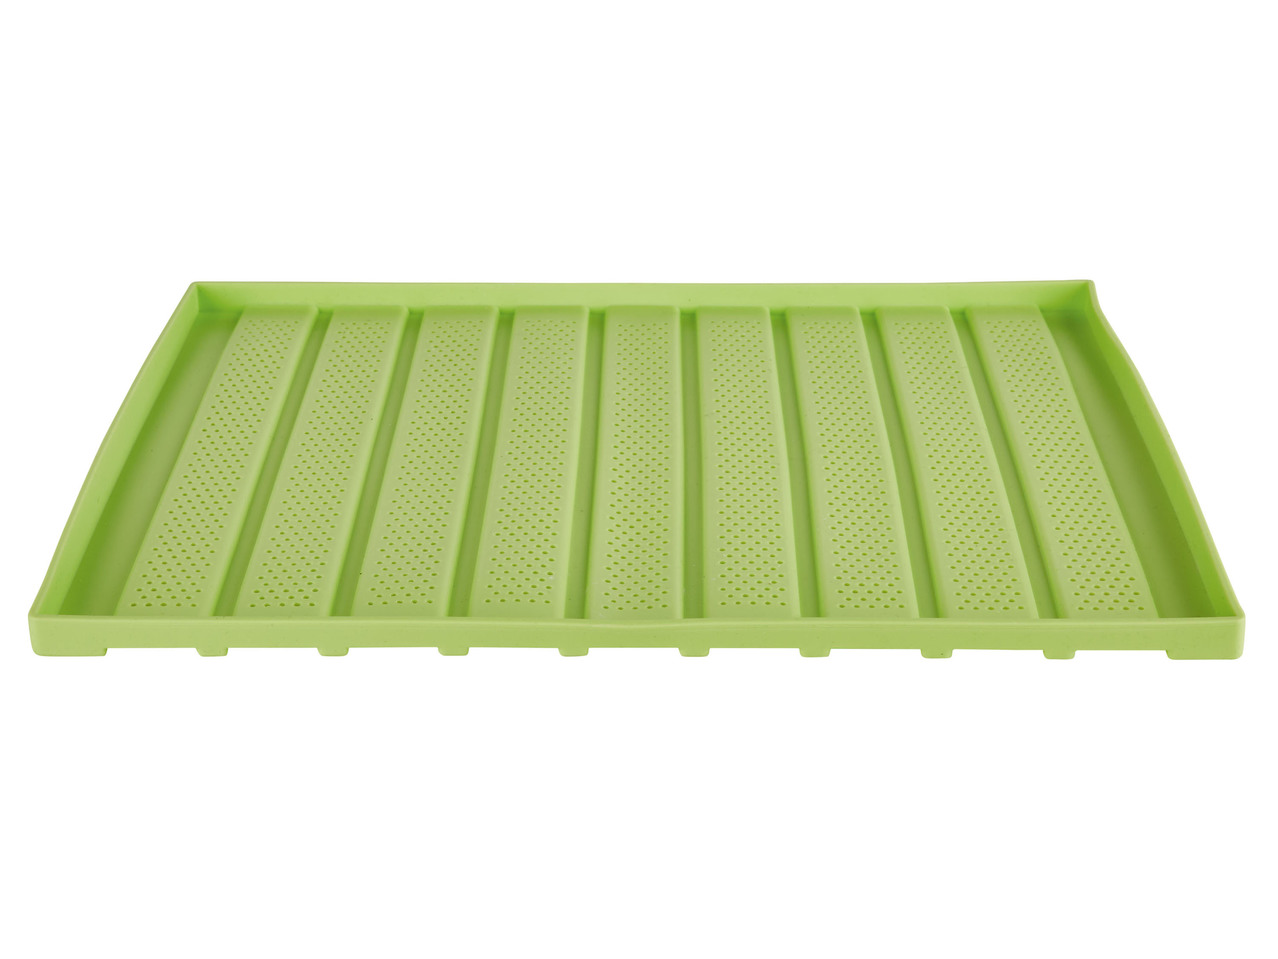 Bread Mould, Bagel Mould or Silicone Baking Mat